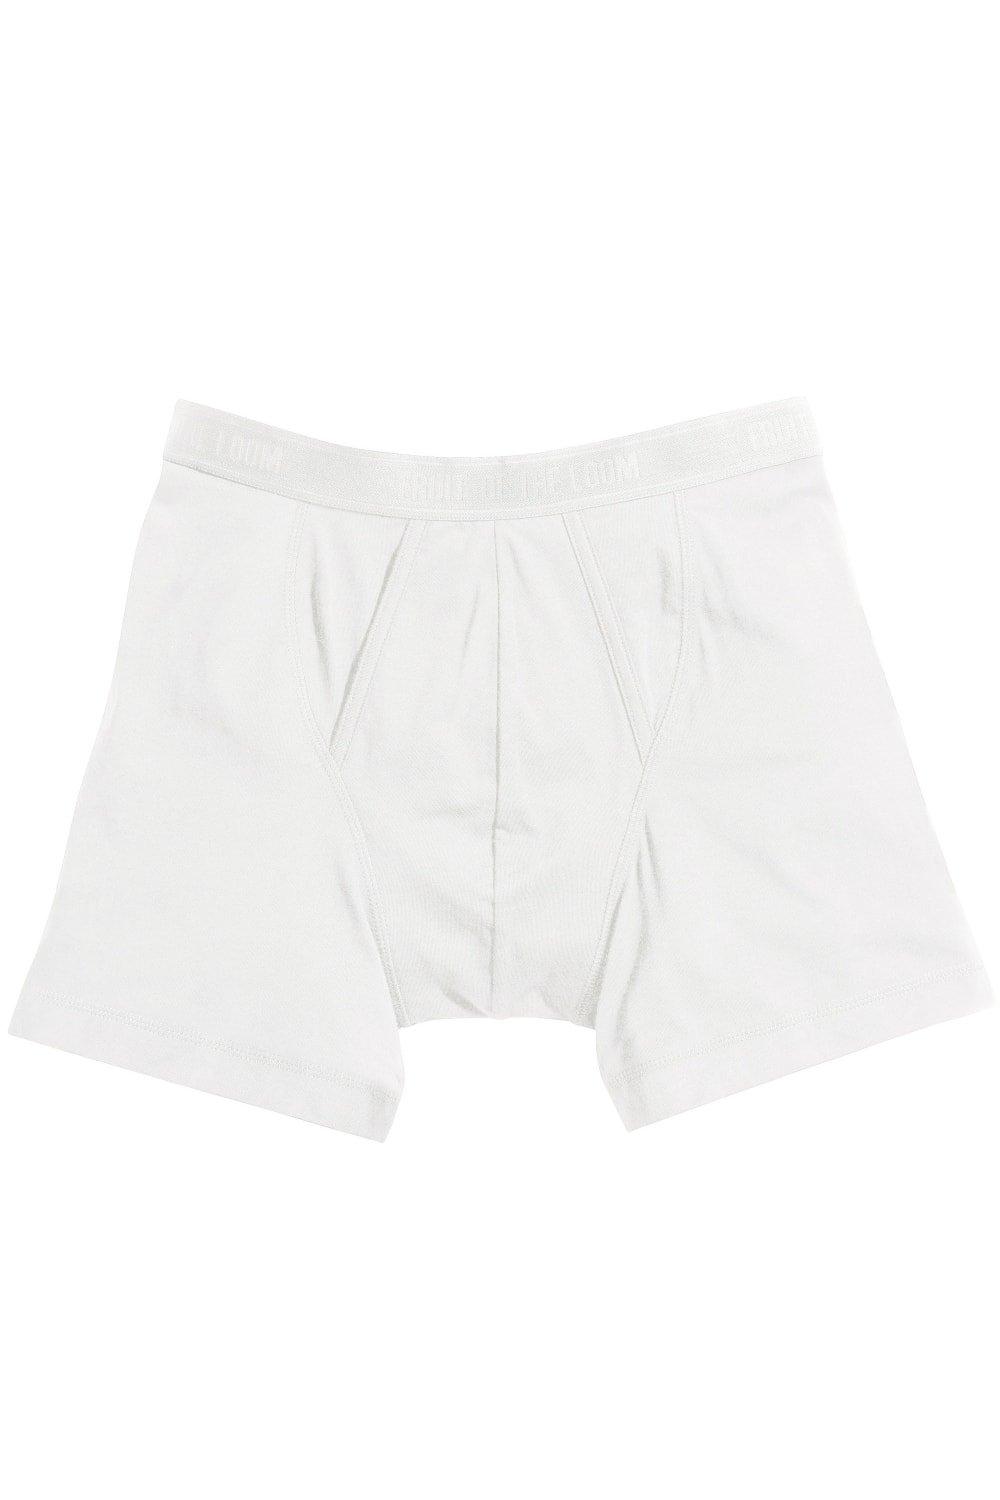 Classic Boxer Shorts (Pack Of 2)